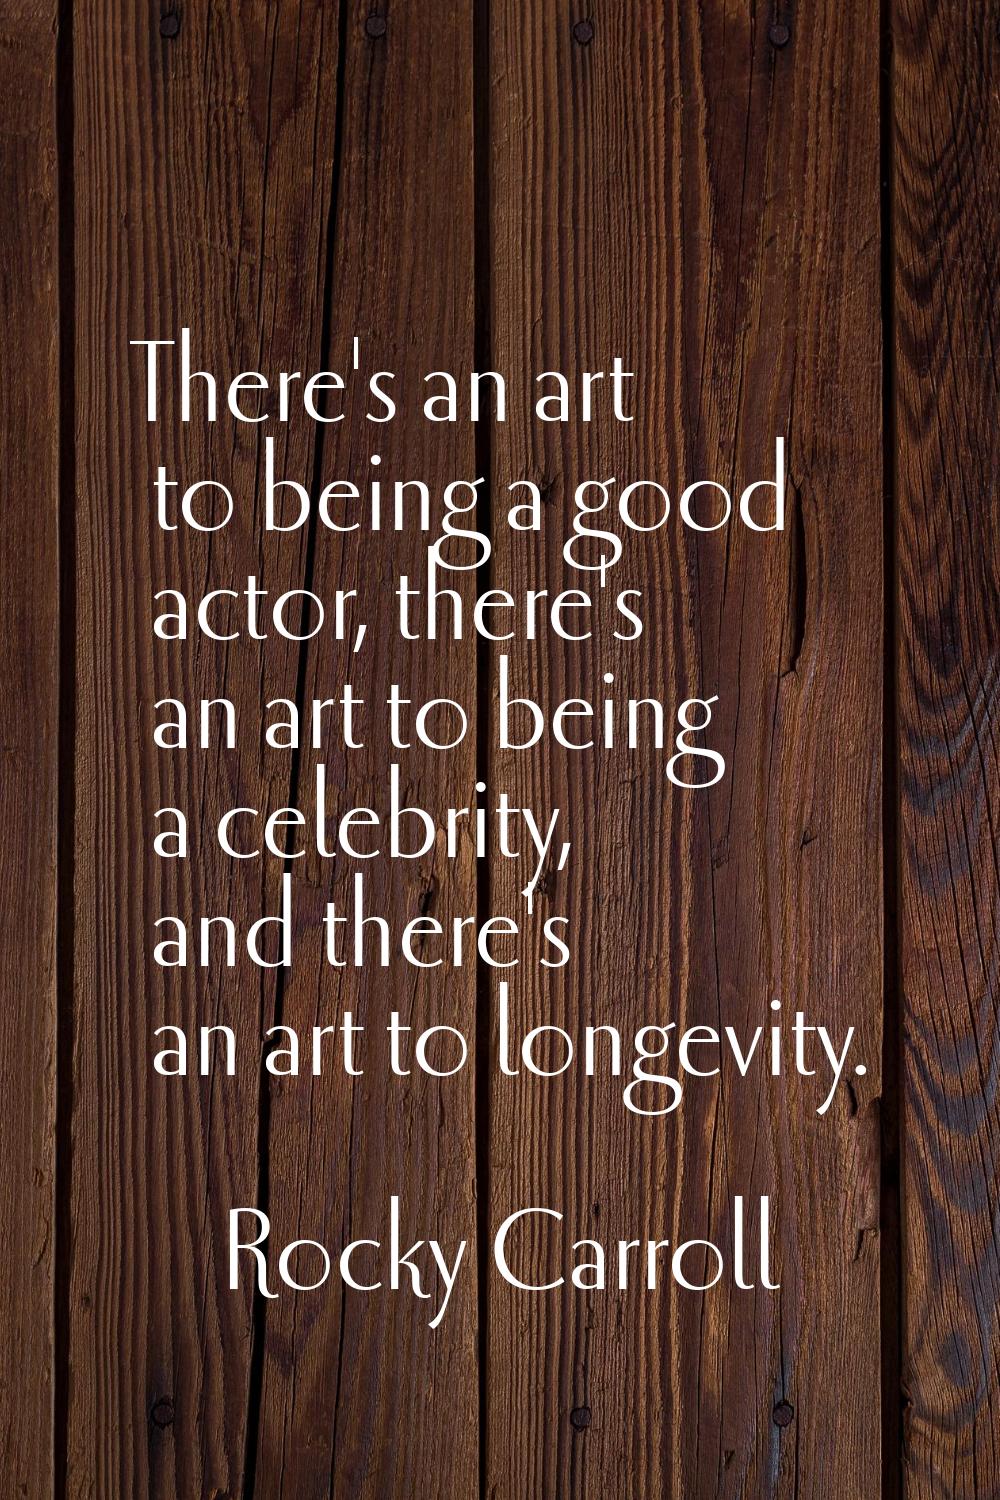 There's an art to being a good actor, there's an art to being a celebrity, and there's an art to lo